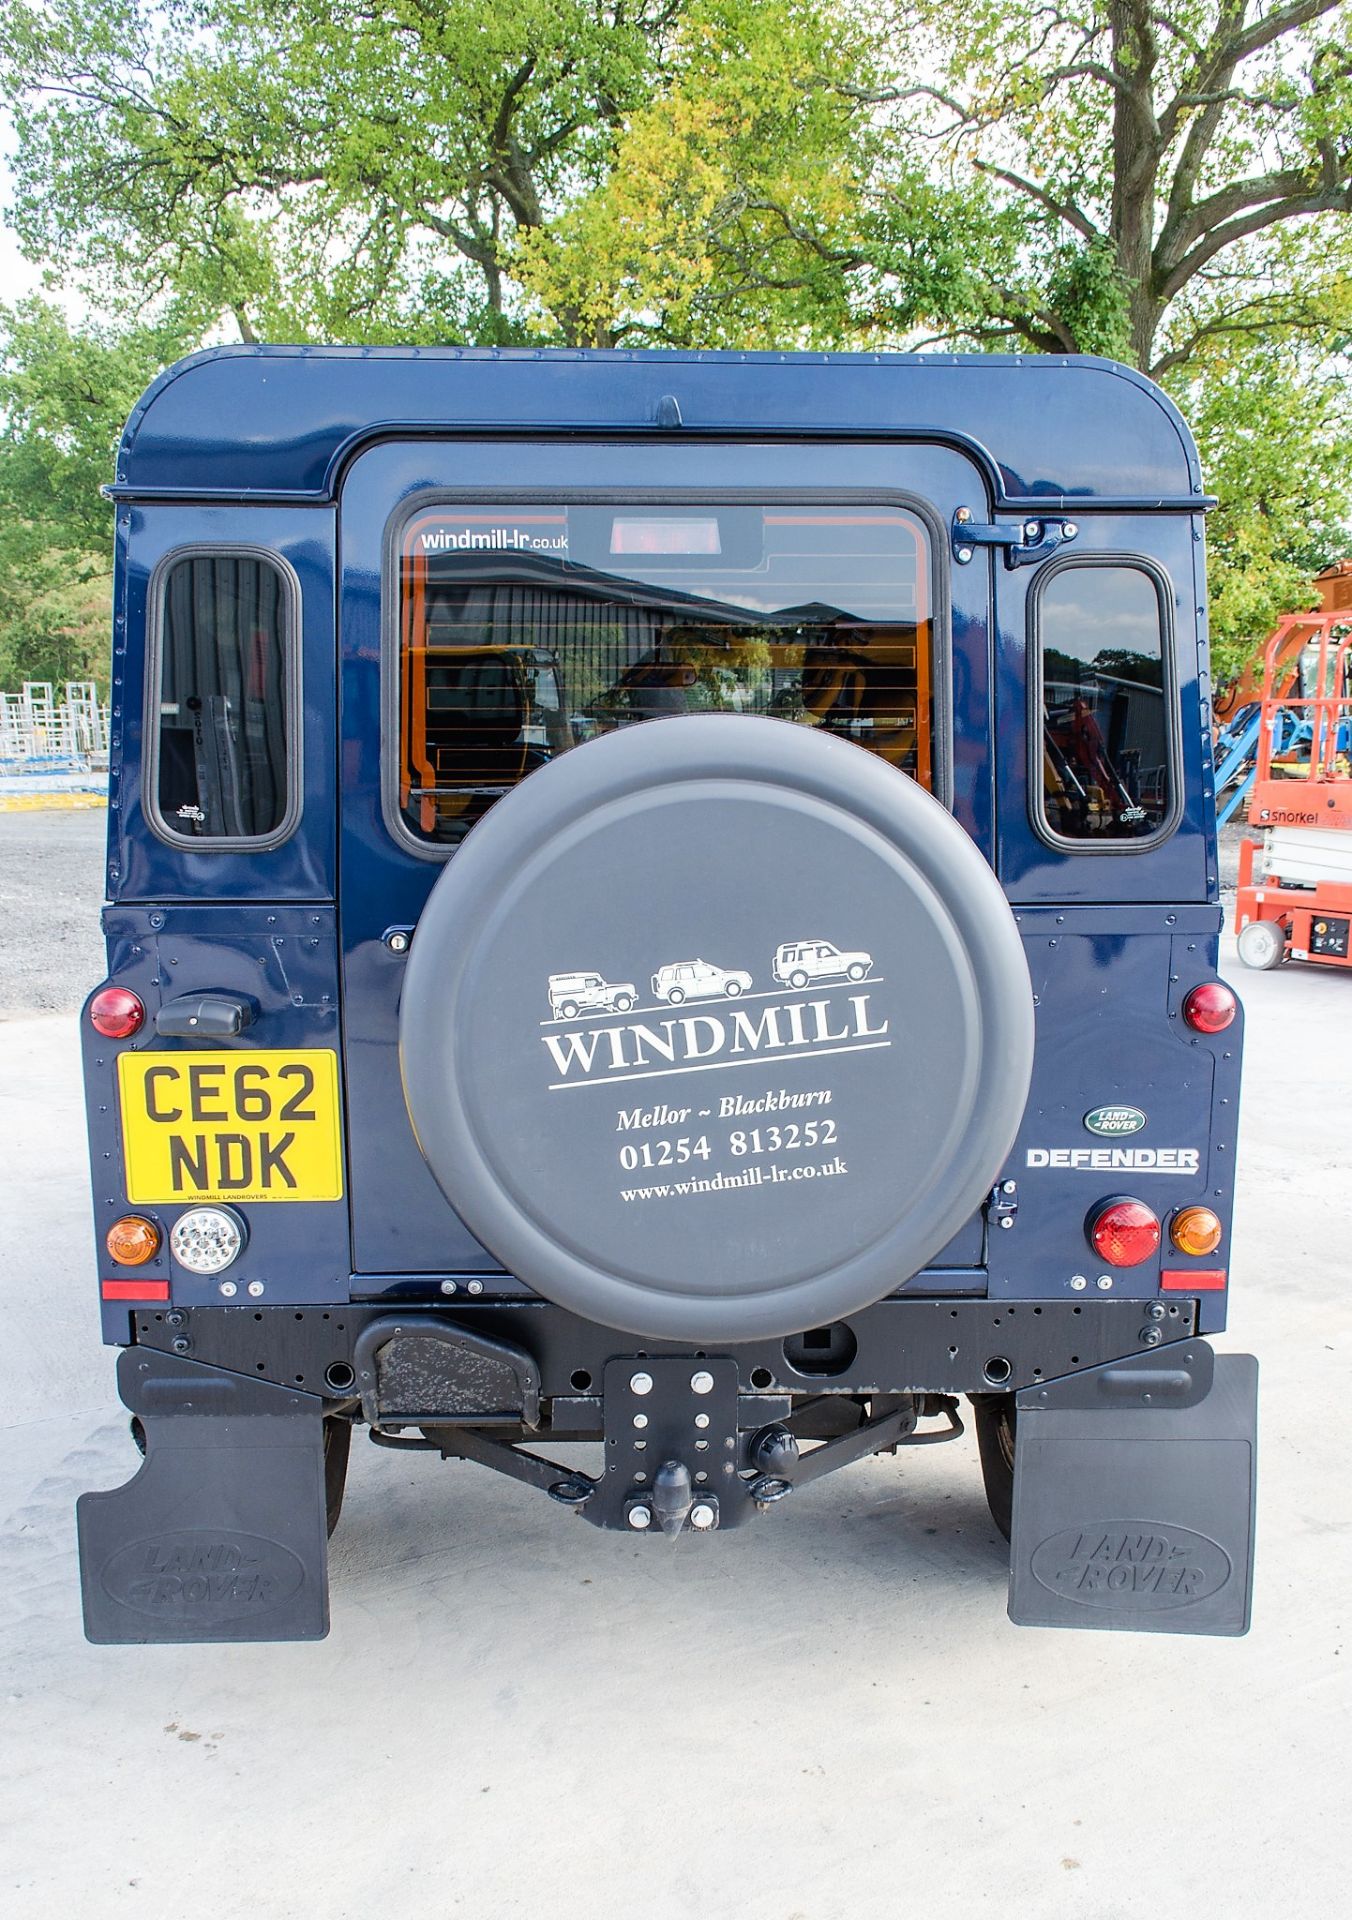 Landrover Defender 90 XS TD 2198cc 4x4 utility vehicle Registration Number: CE62 NDK Date of - Image 6 of 30